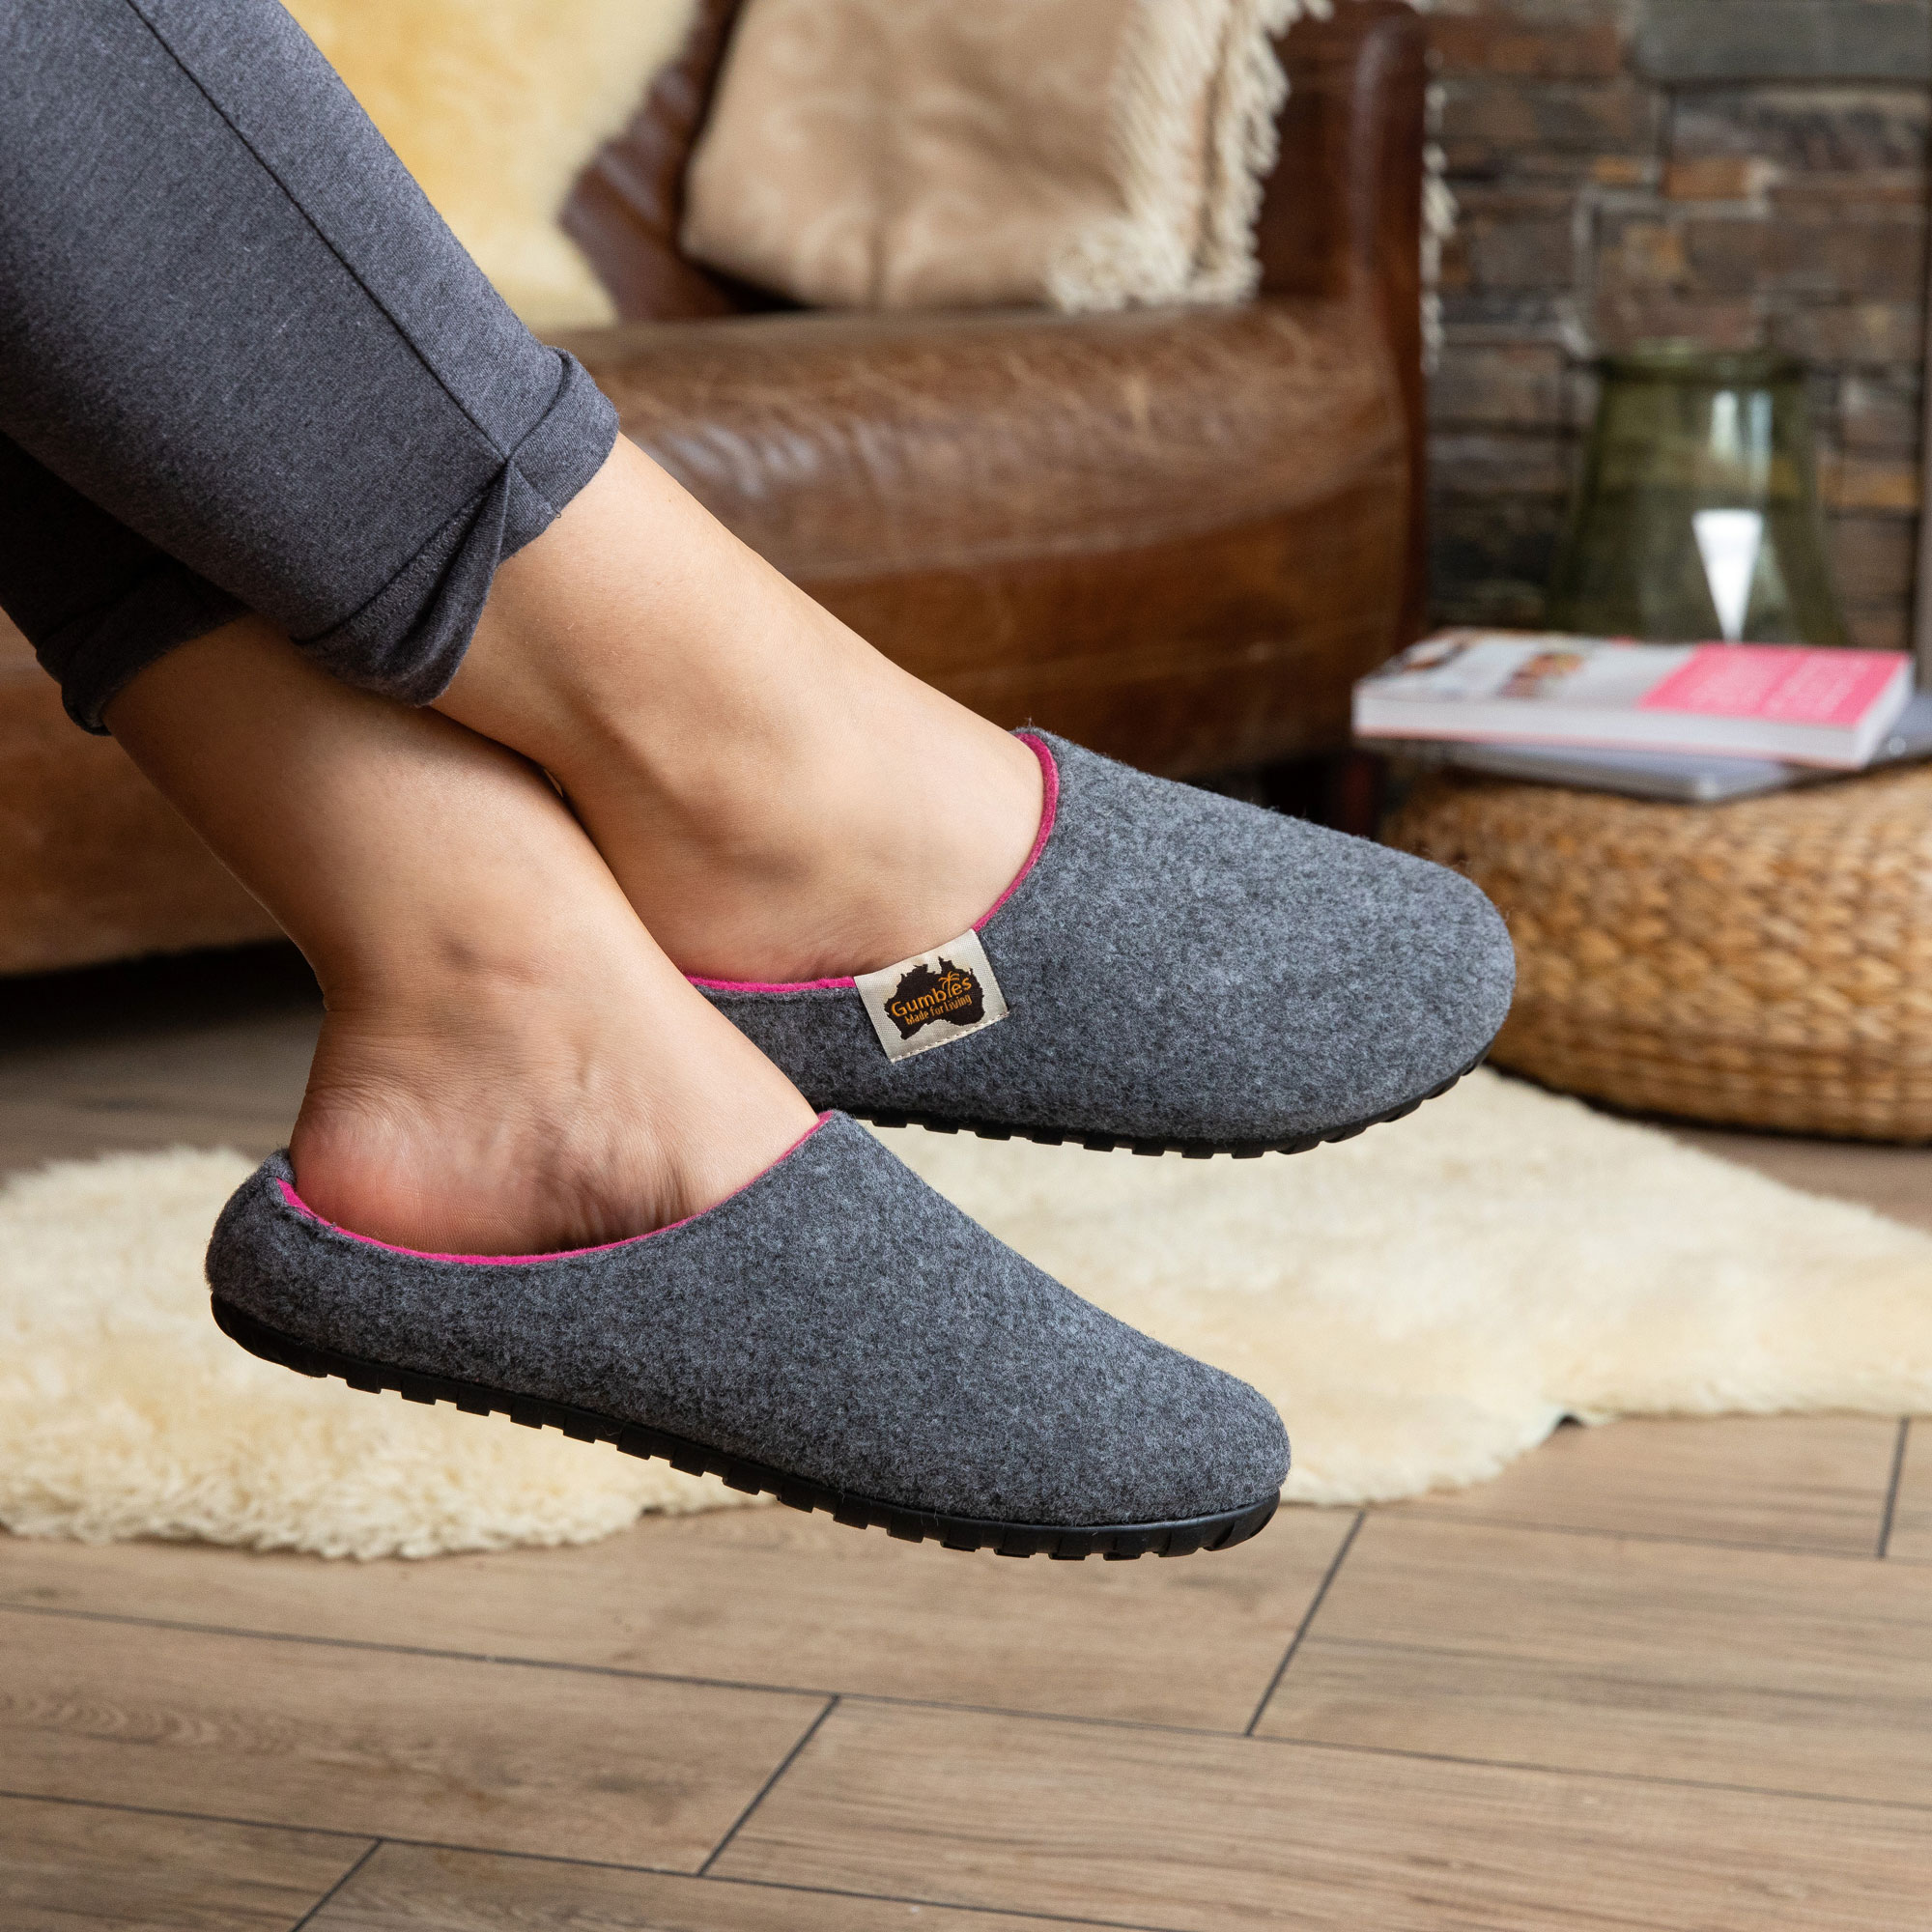 GUMBIES - Outback Slipper, GREY-PINK 